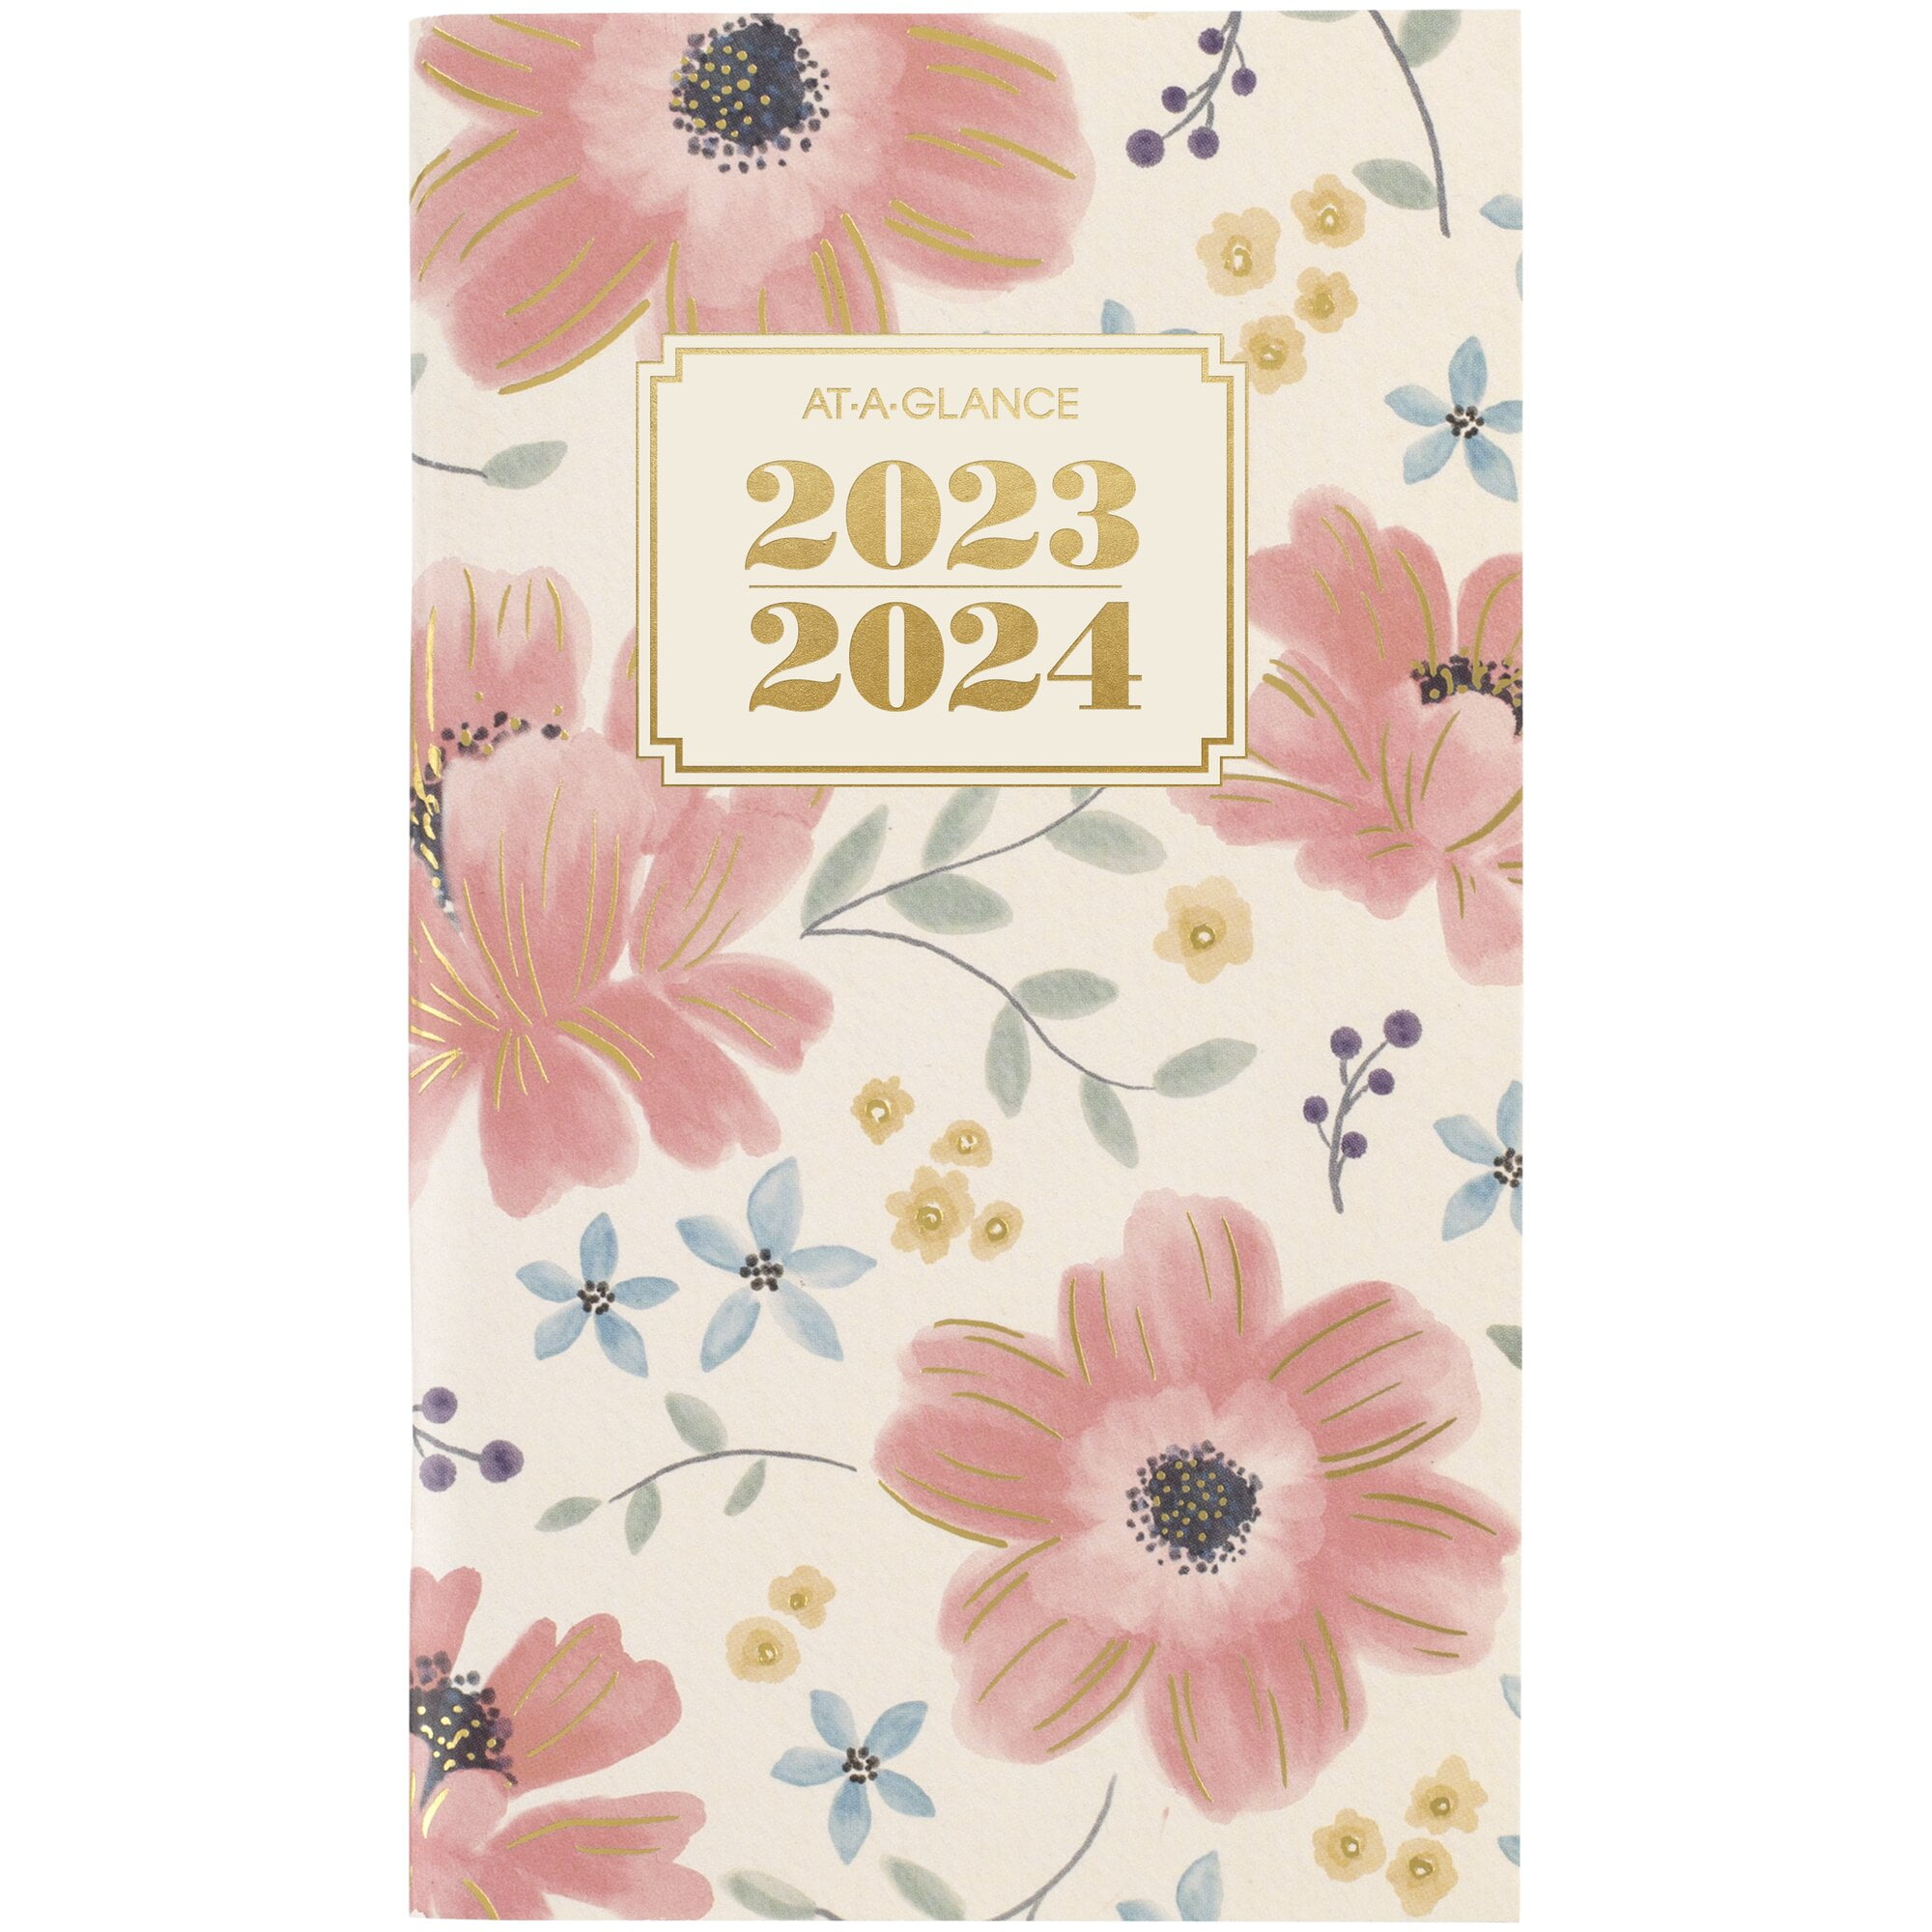 3-1/2" x 6" Monthly Planner 2021 Pocket Calendar by AT-A-GLANCE Pocket Size, 